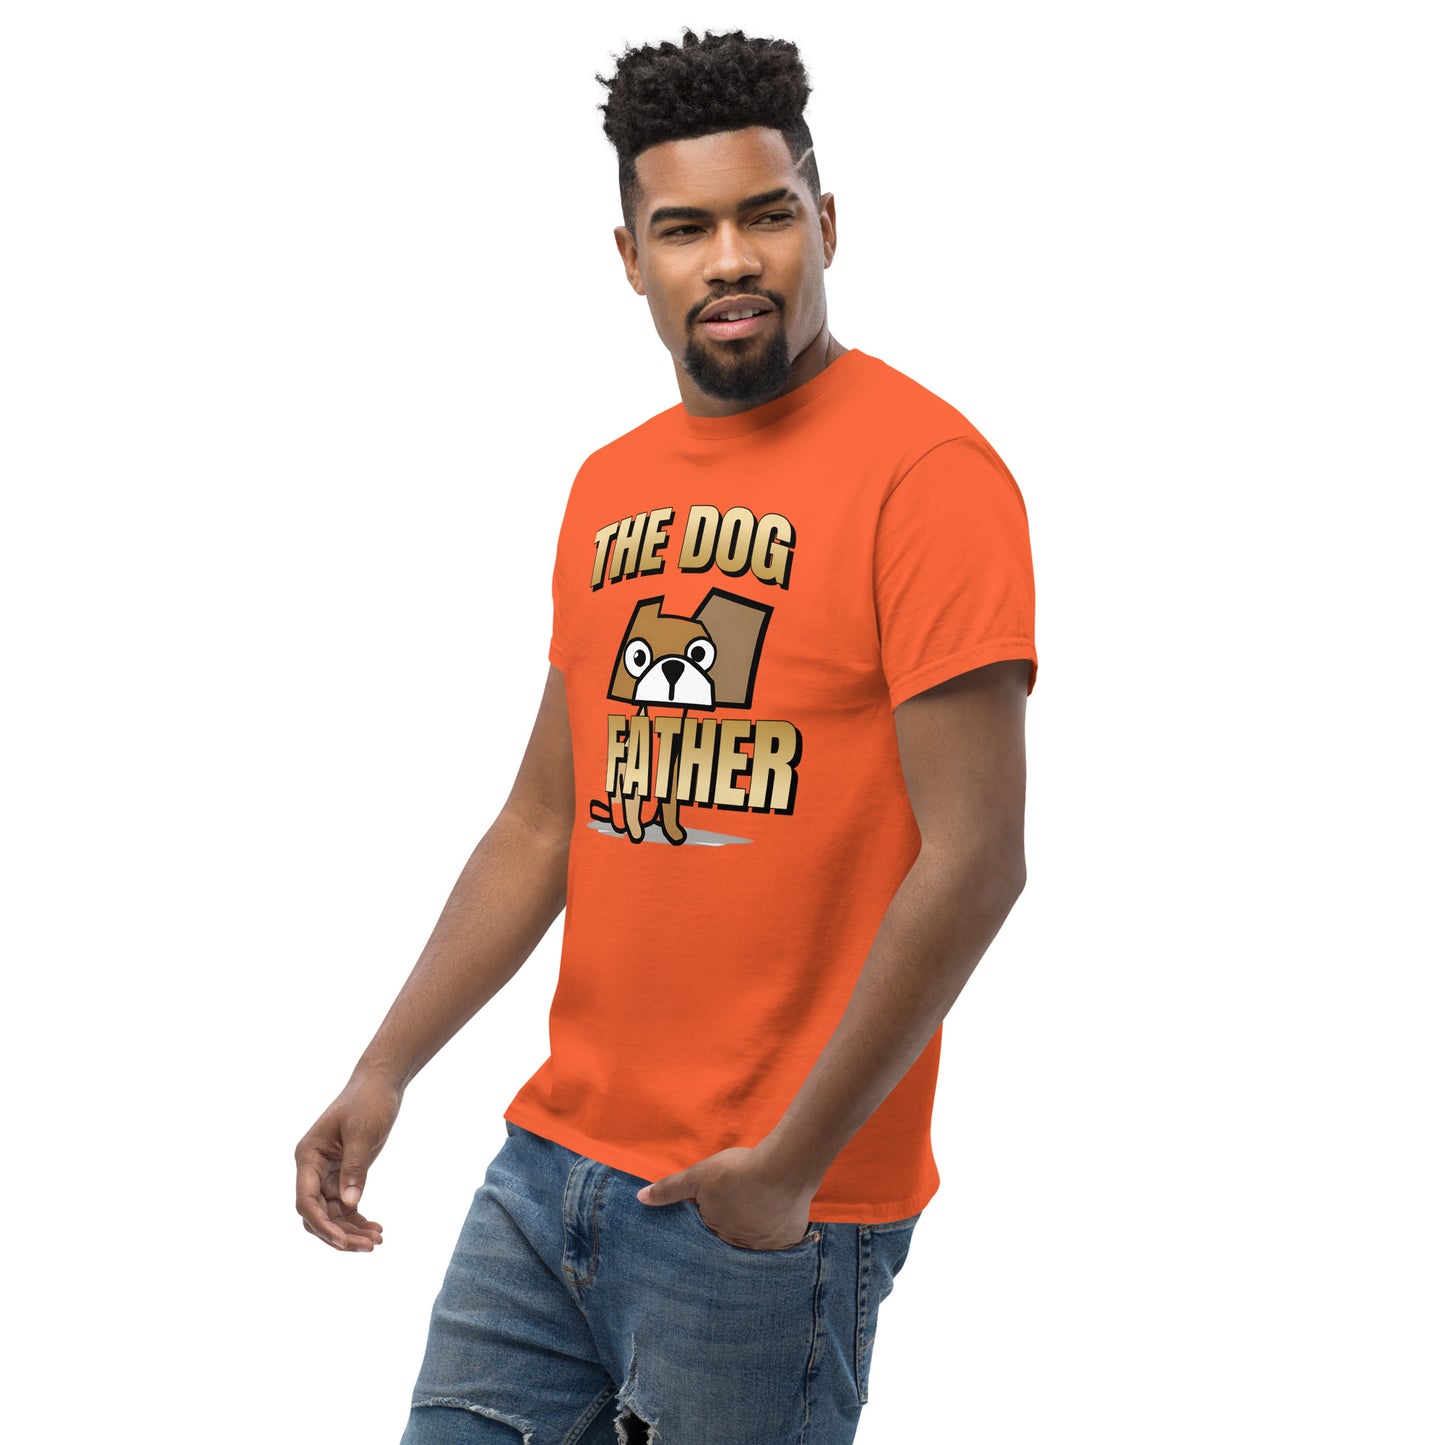 The Dog Father Men's classic tee